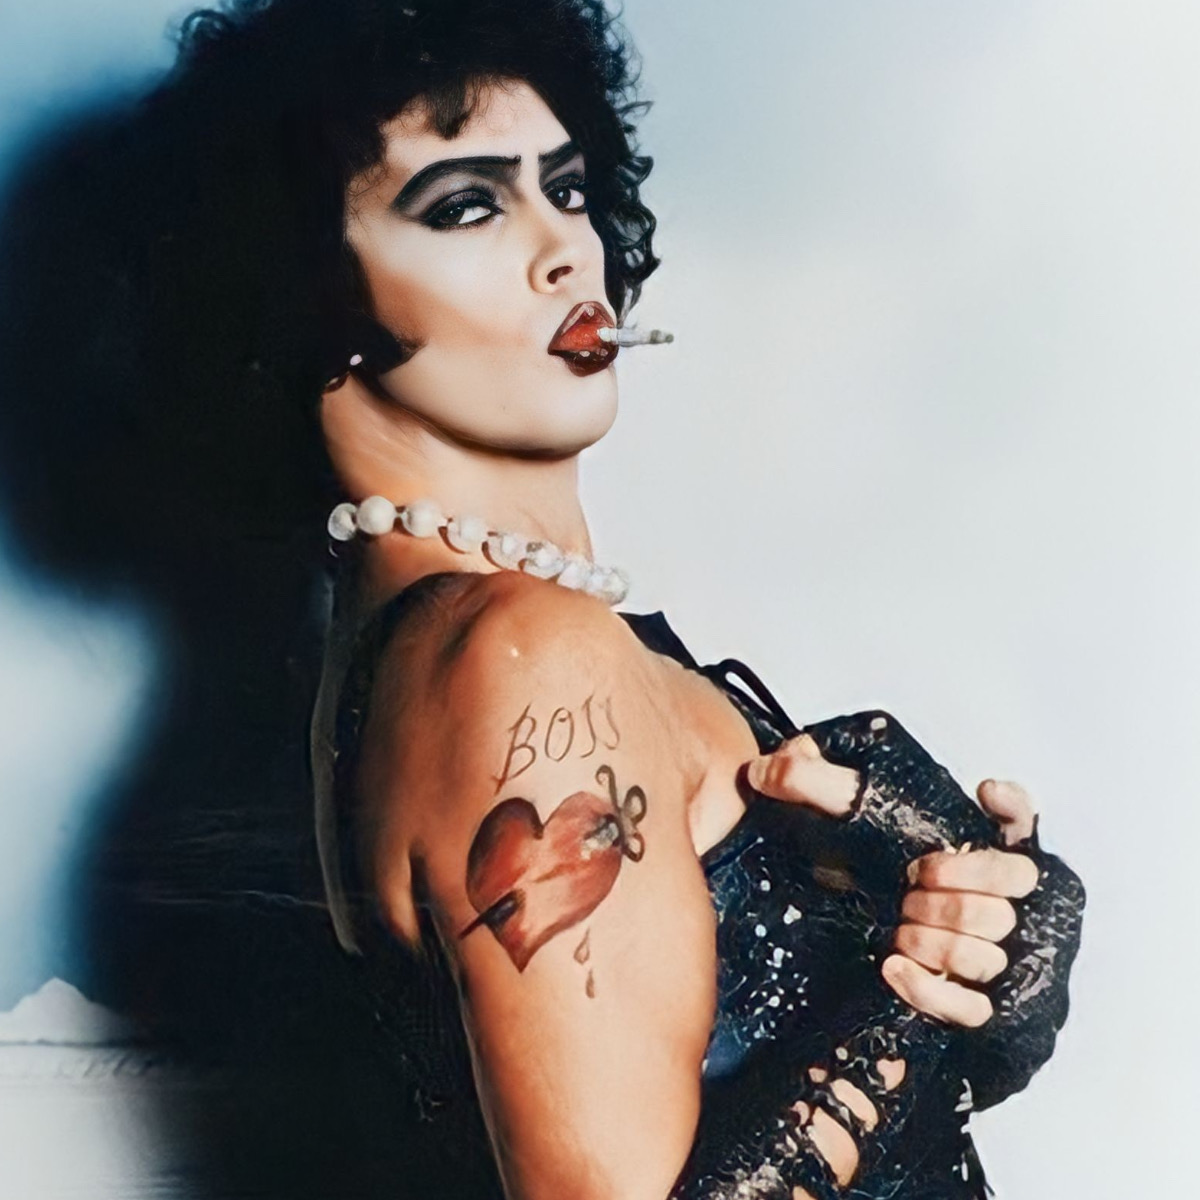 Tim Curry in one of his images